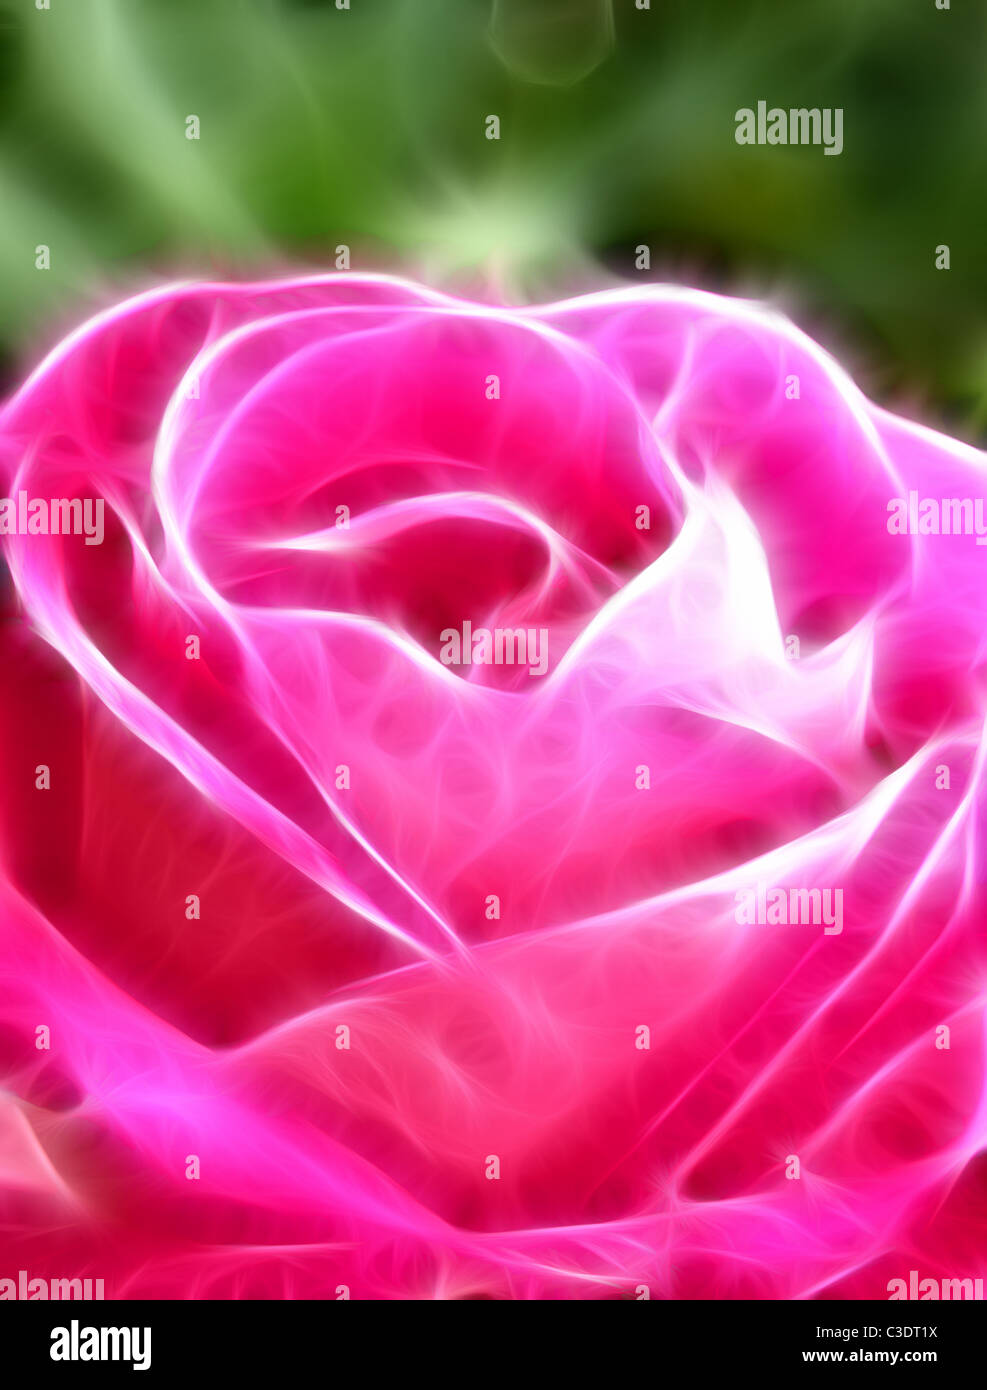 Abstract fractal background of a pink rose Stock Photo